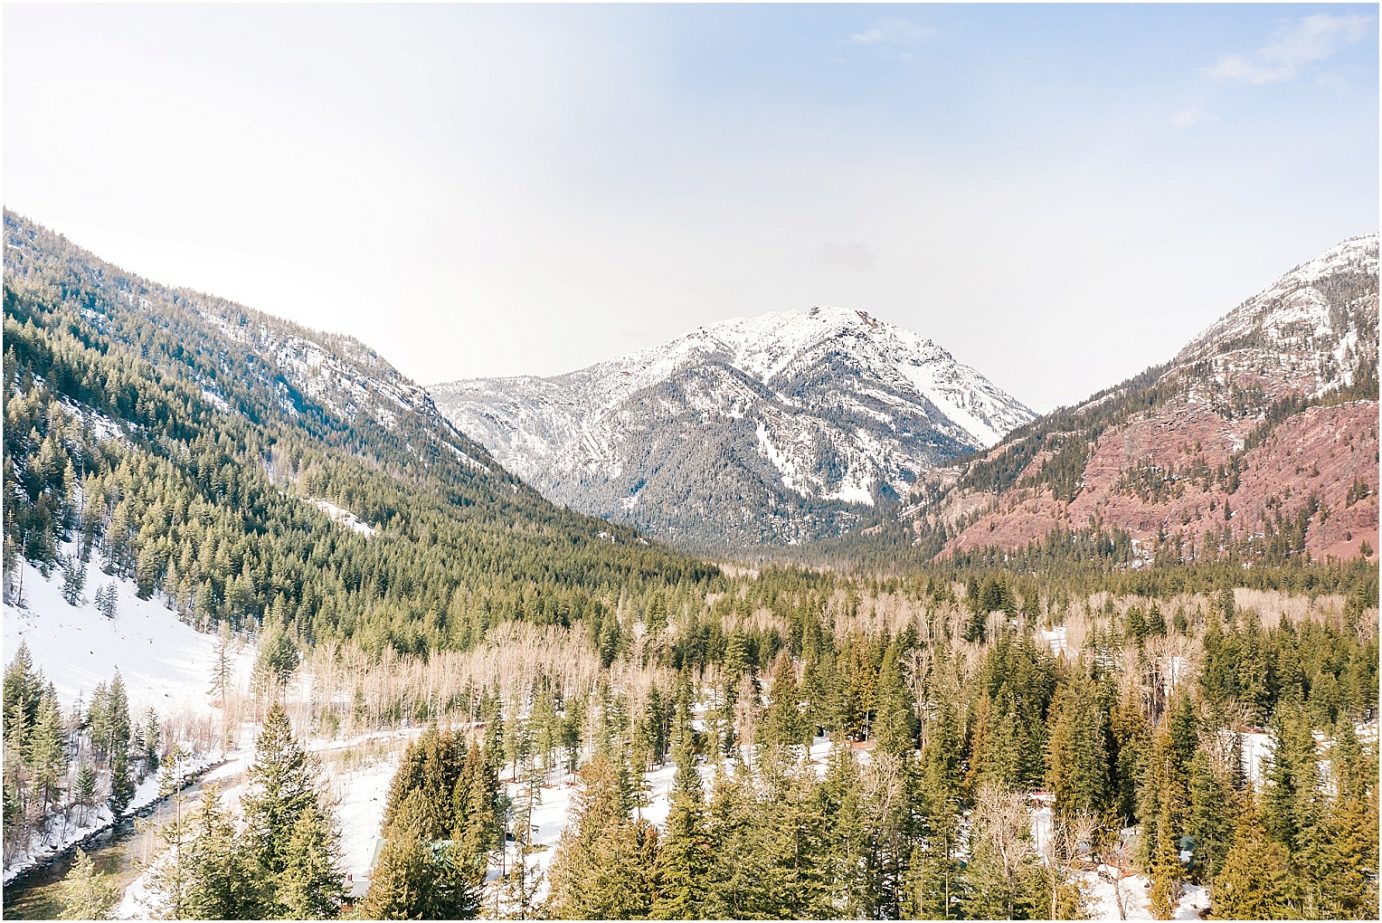 Intimate Methow Valley Elopement Image of the valley